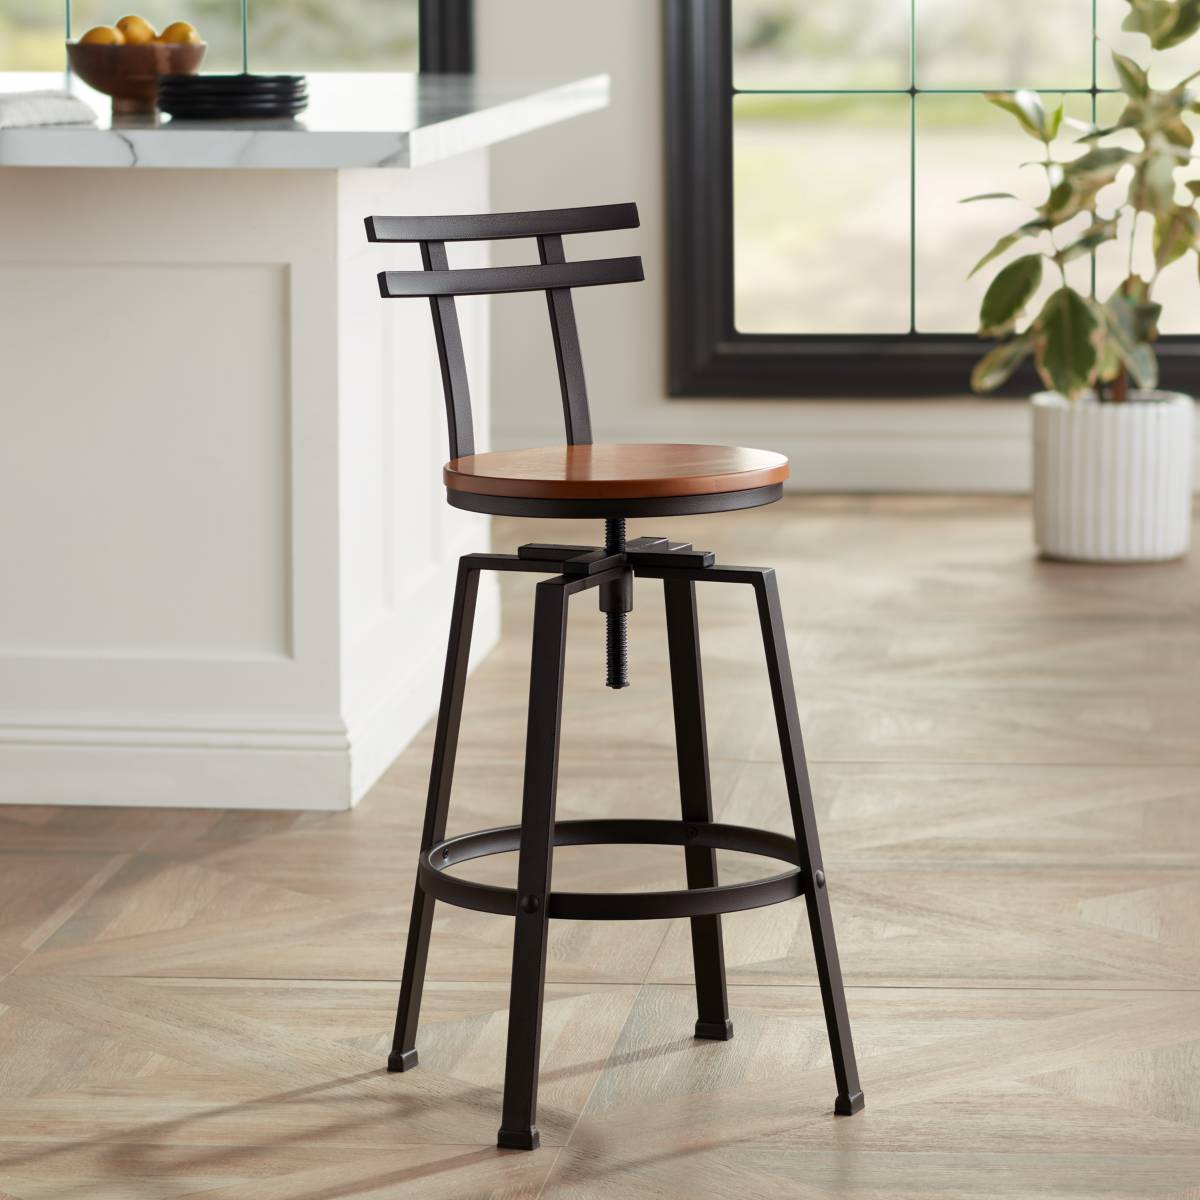 Barstools - Quality Bar & Counter Height Stools - Page 2 | Lamps Plus